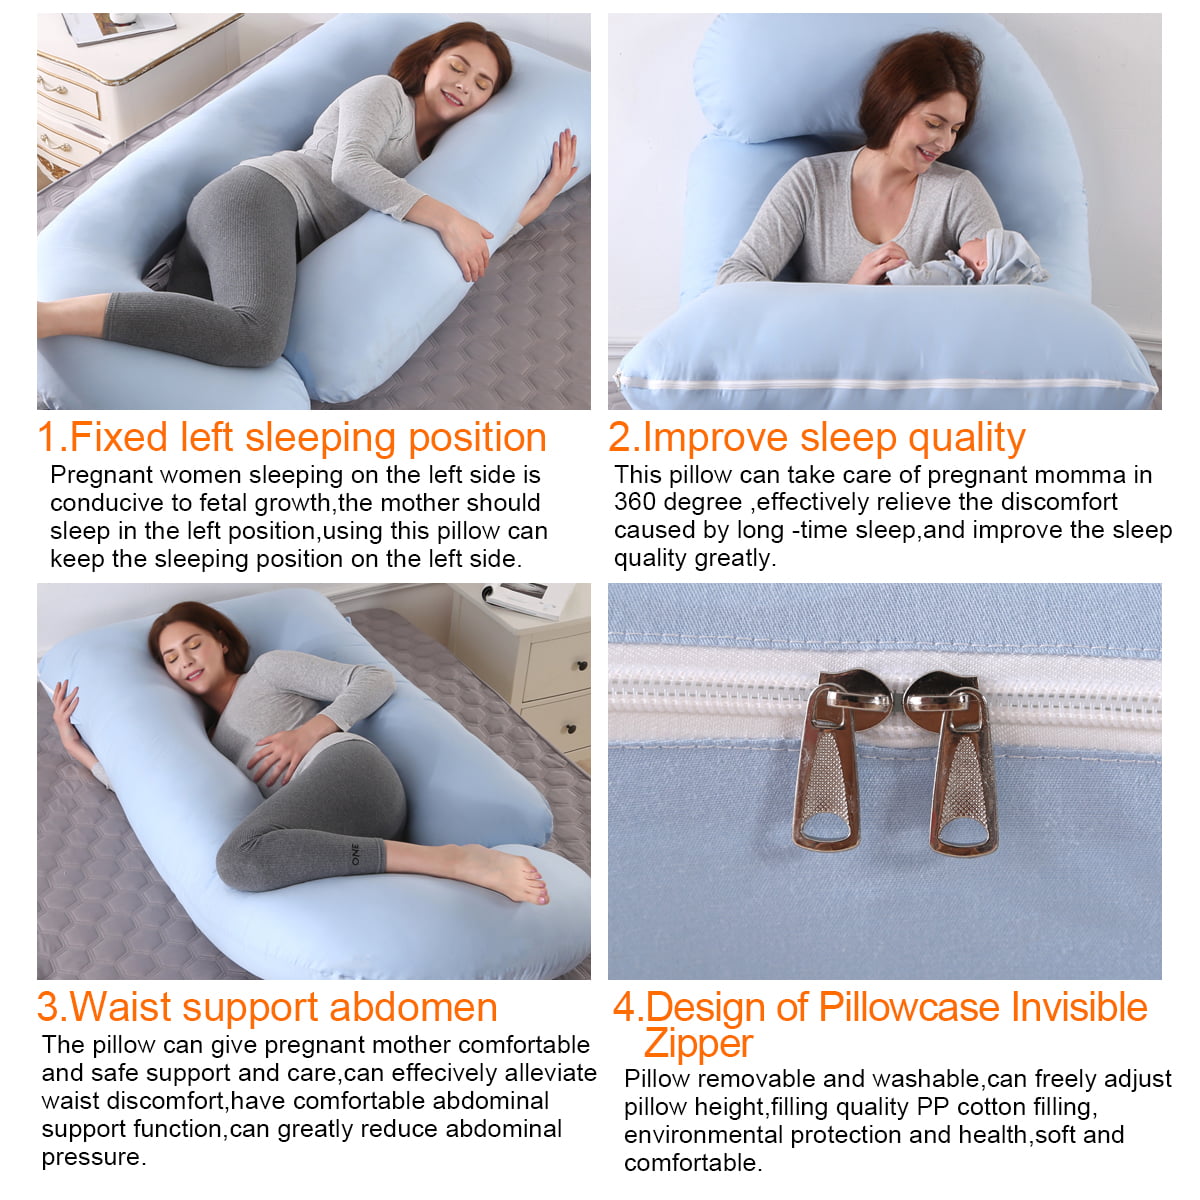 Cartoon Style Cotton Pregnancy Pregnancy Pillow Kmart For Abdomen  Protection And Comfortable Sleep Four Seasons From Qiaomaidou05, $18.31